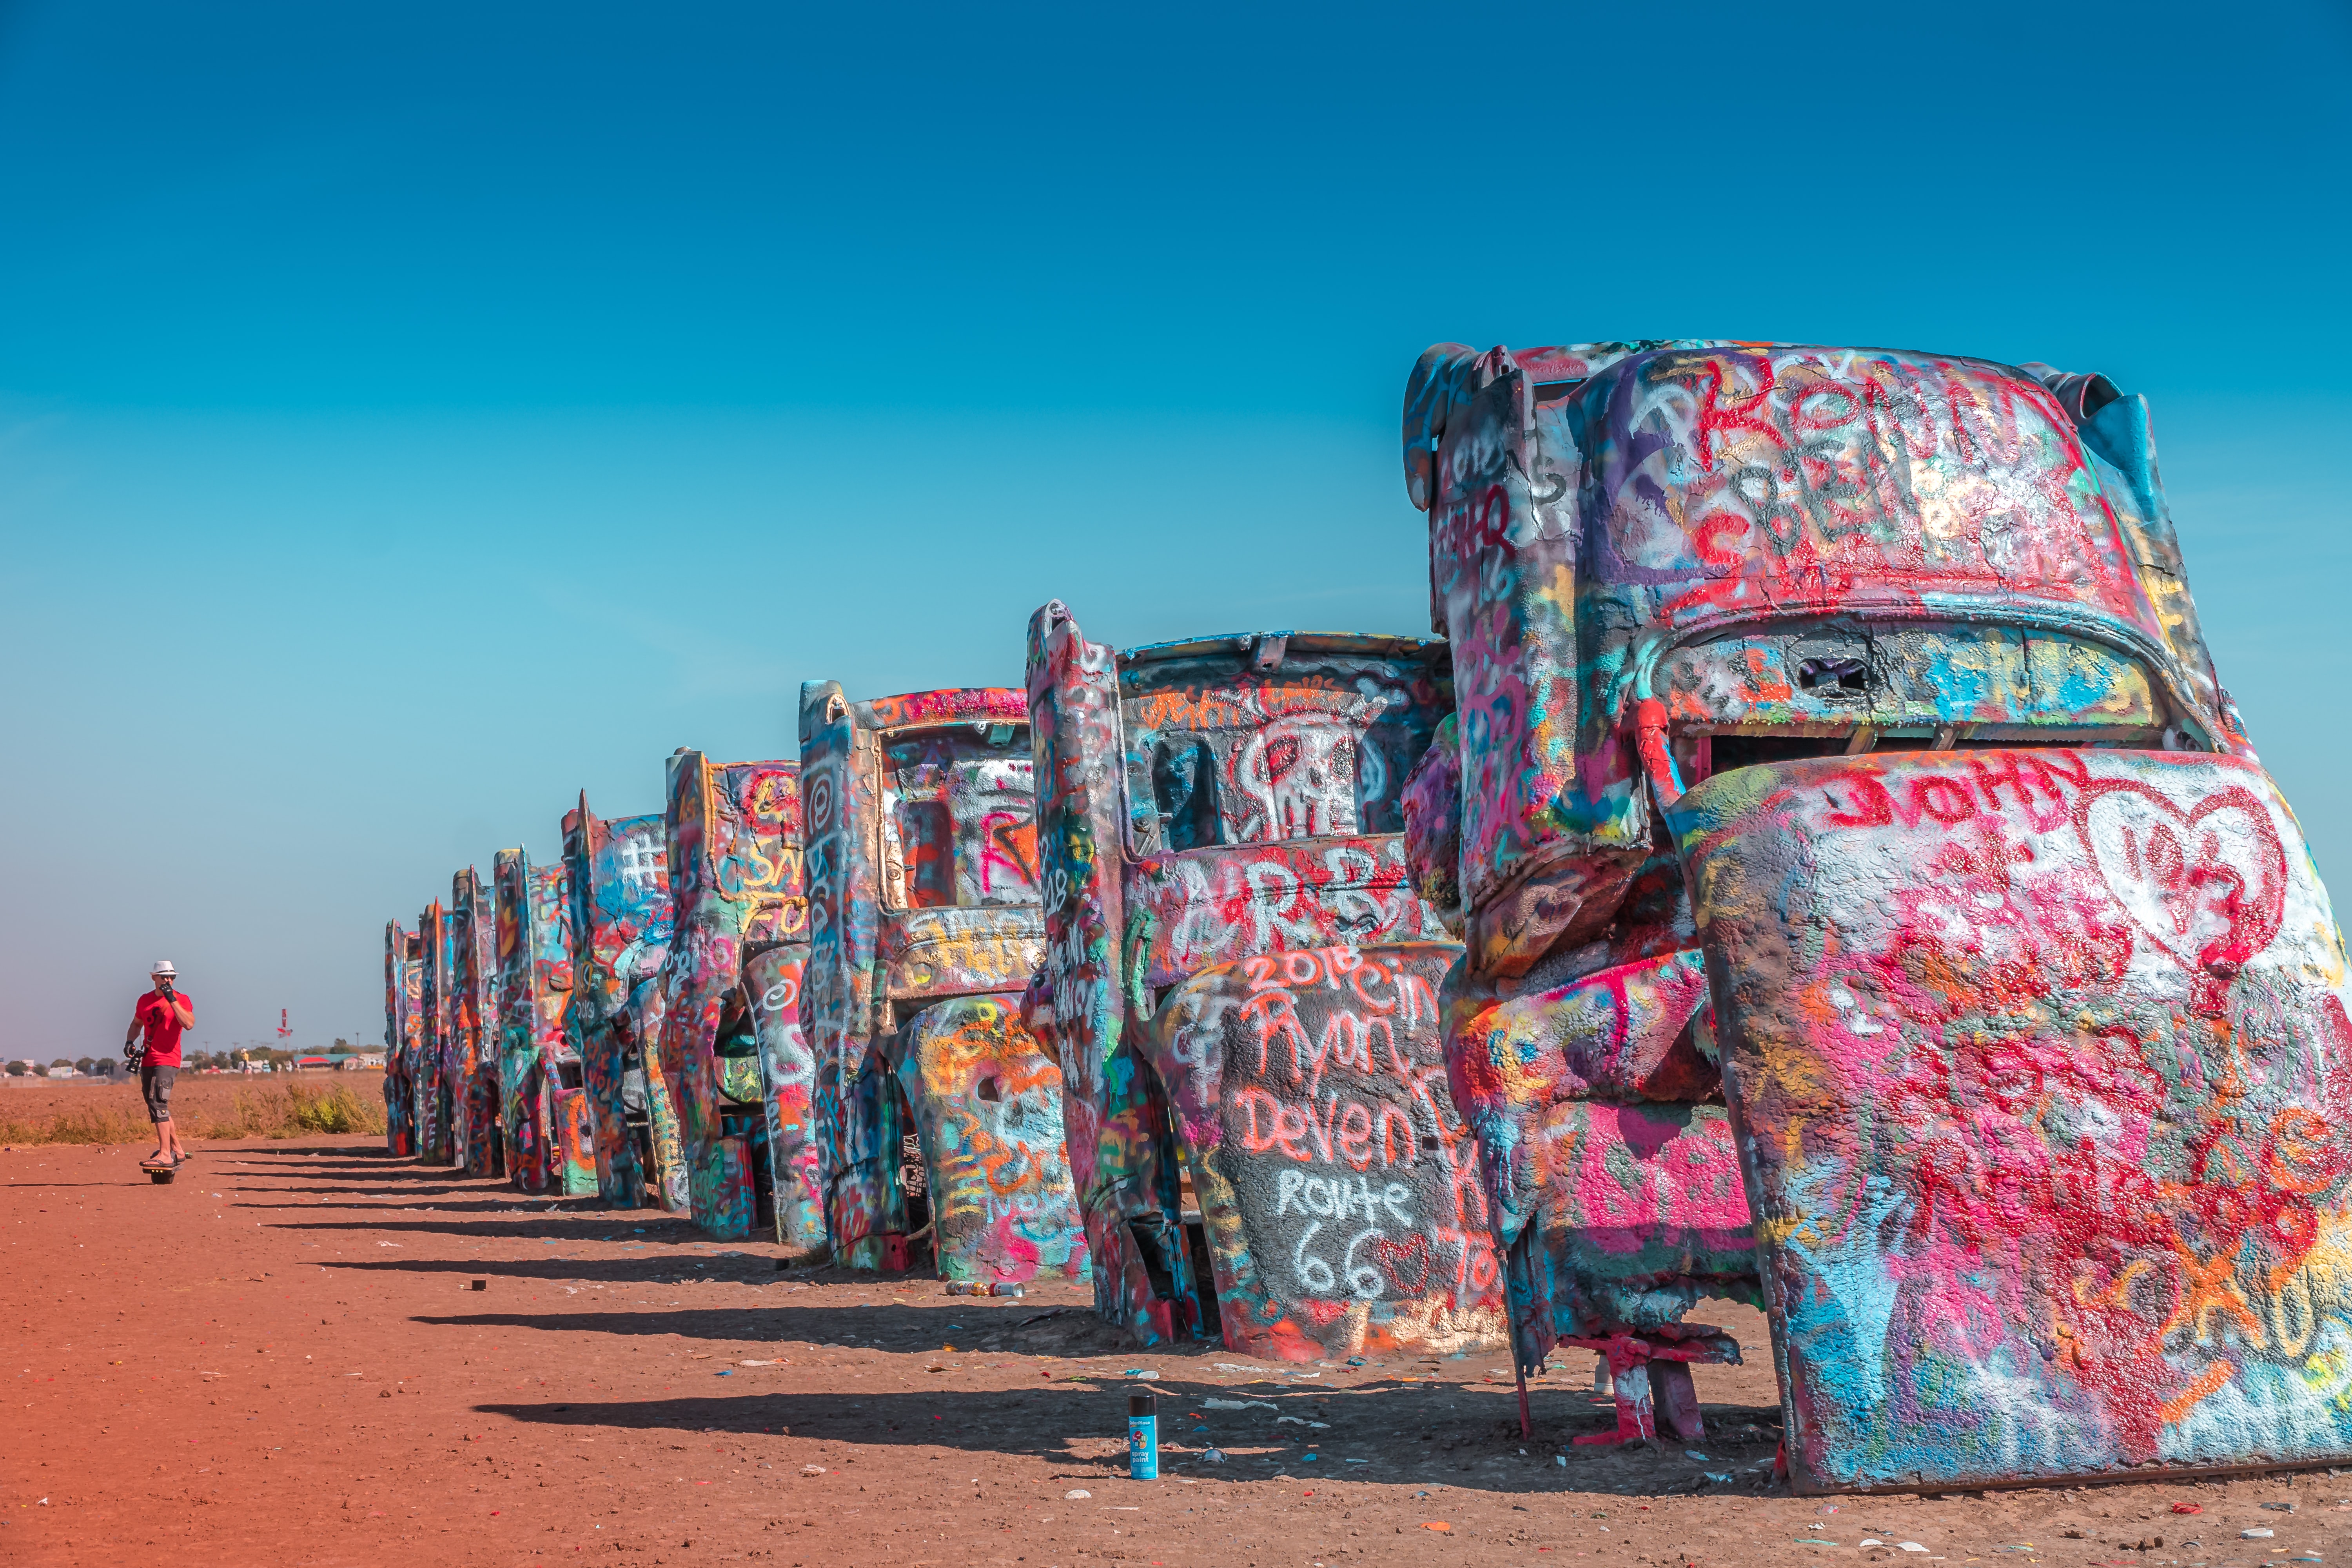 Cadillac Ranch on Route 66 in the Texas desert